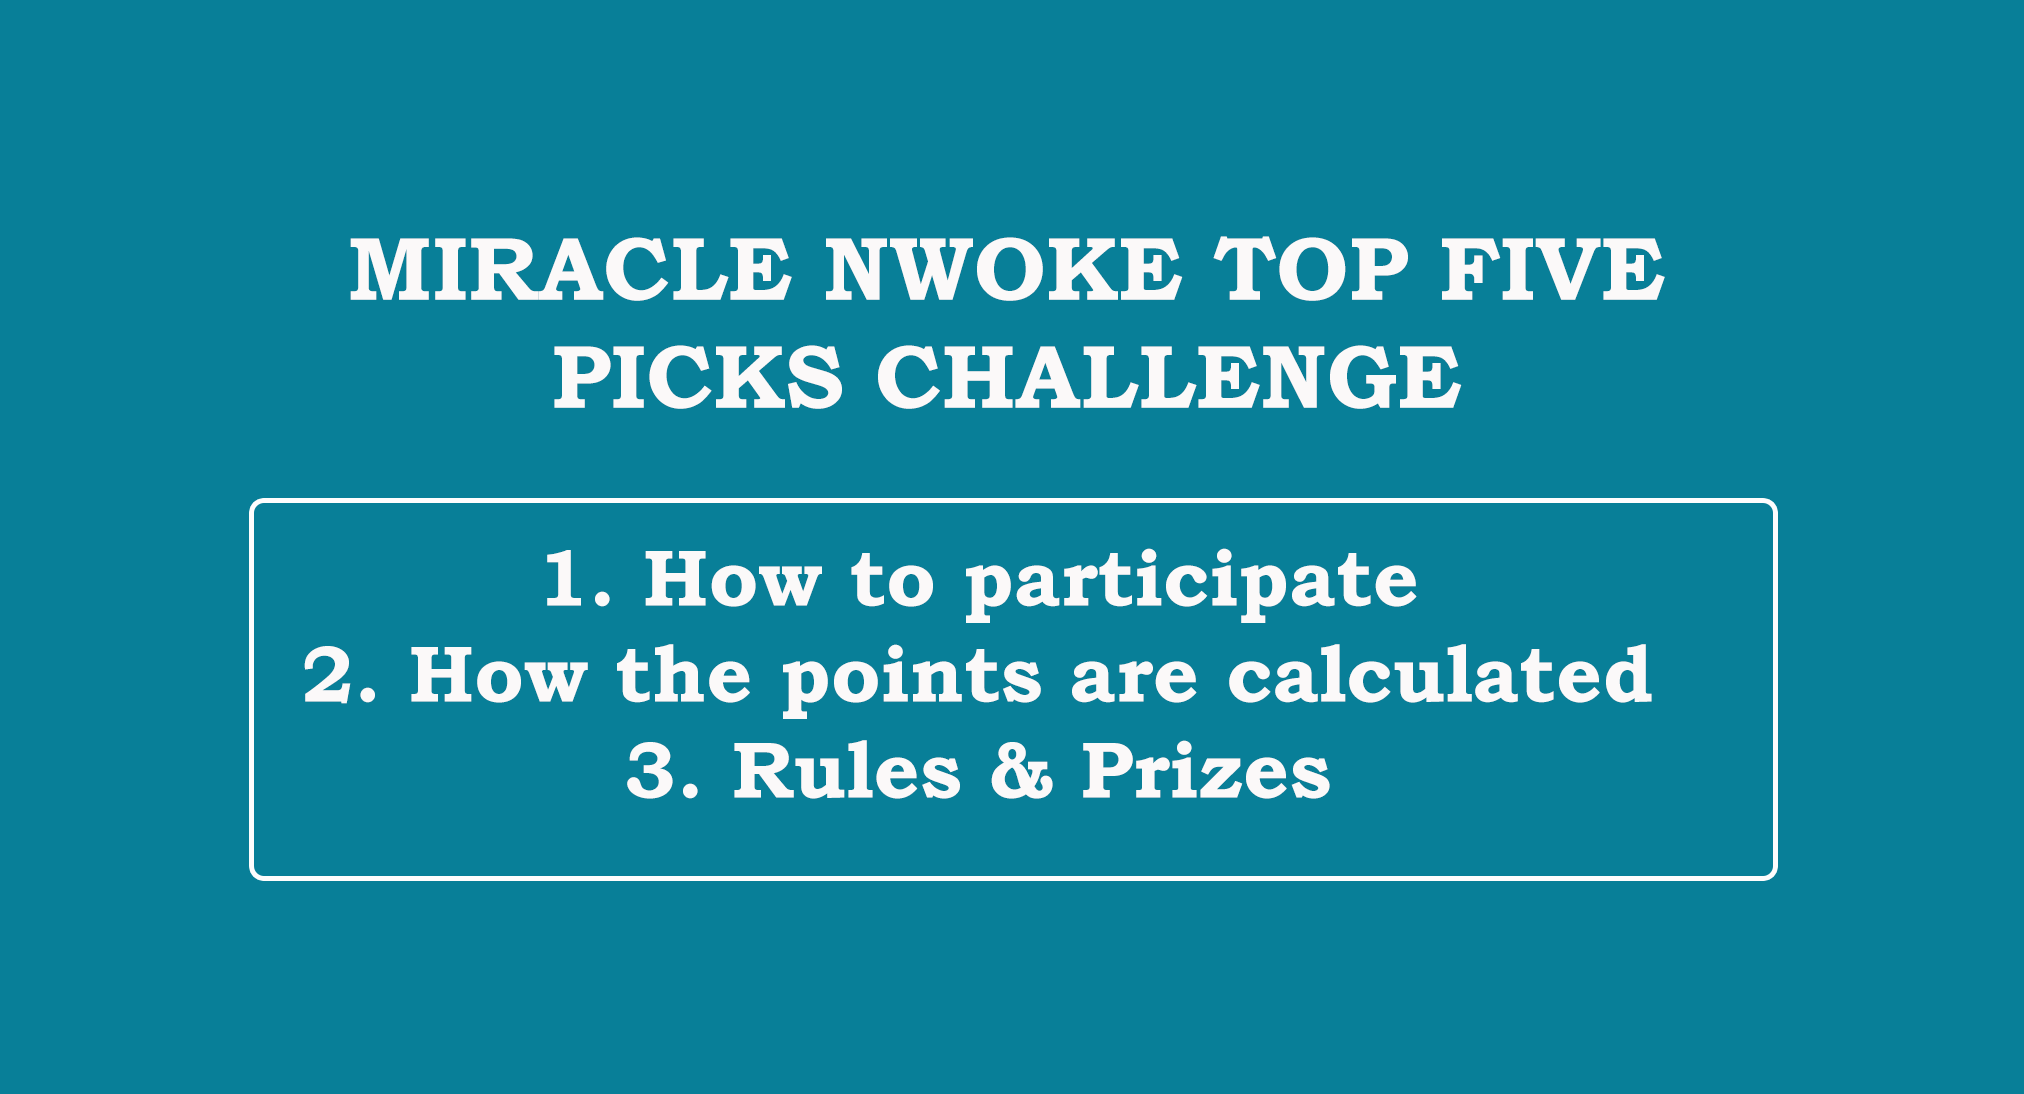 How to participate for Miracle Nwoke's Weekly Top Five Picks Challenge